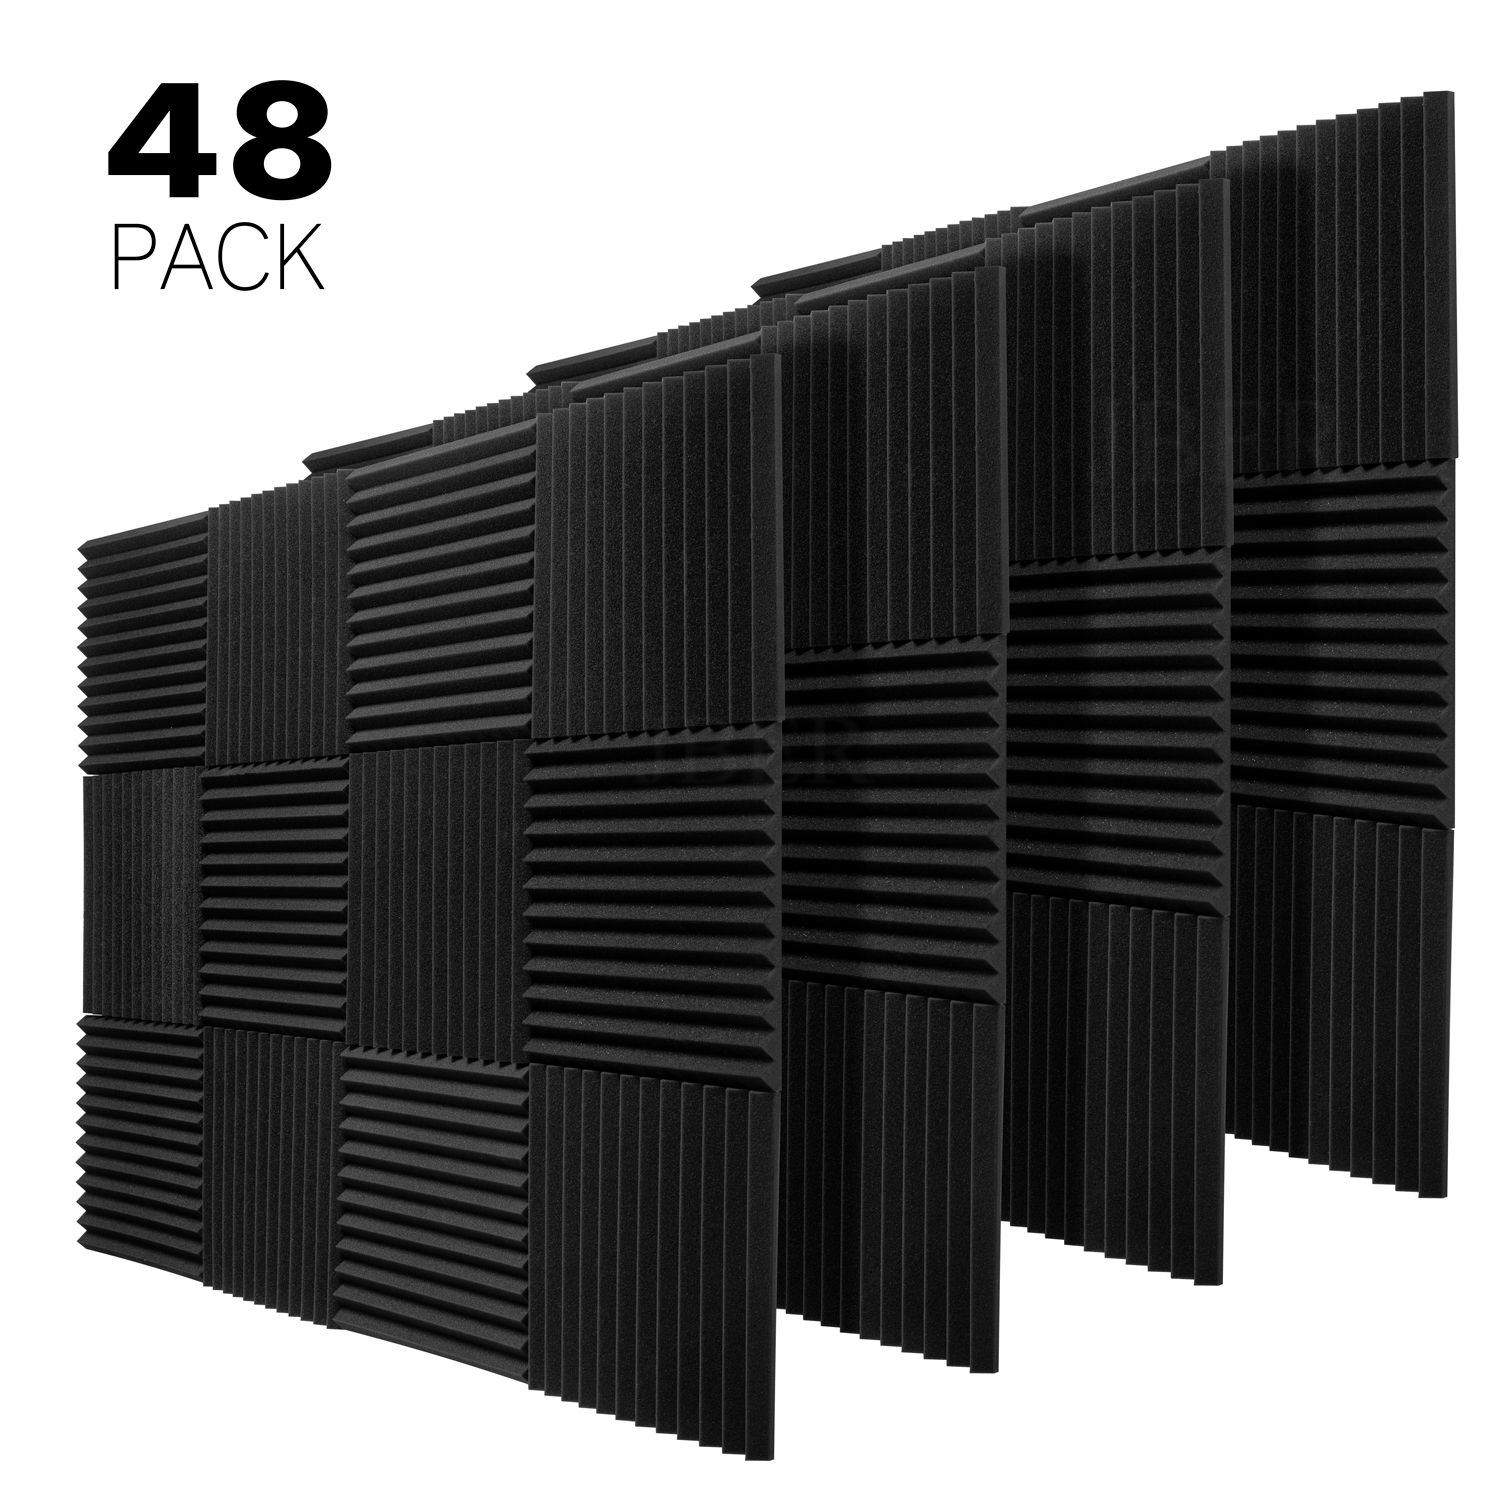 JBER Acoustic Absorption Panels 6 Pack, Gray 12 X 12 X 0.45 Soundproofing Insulation Panel Tiles High Density Polyester Fiber Acoustic Treatment for Studio Home and Office 